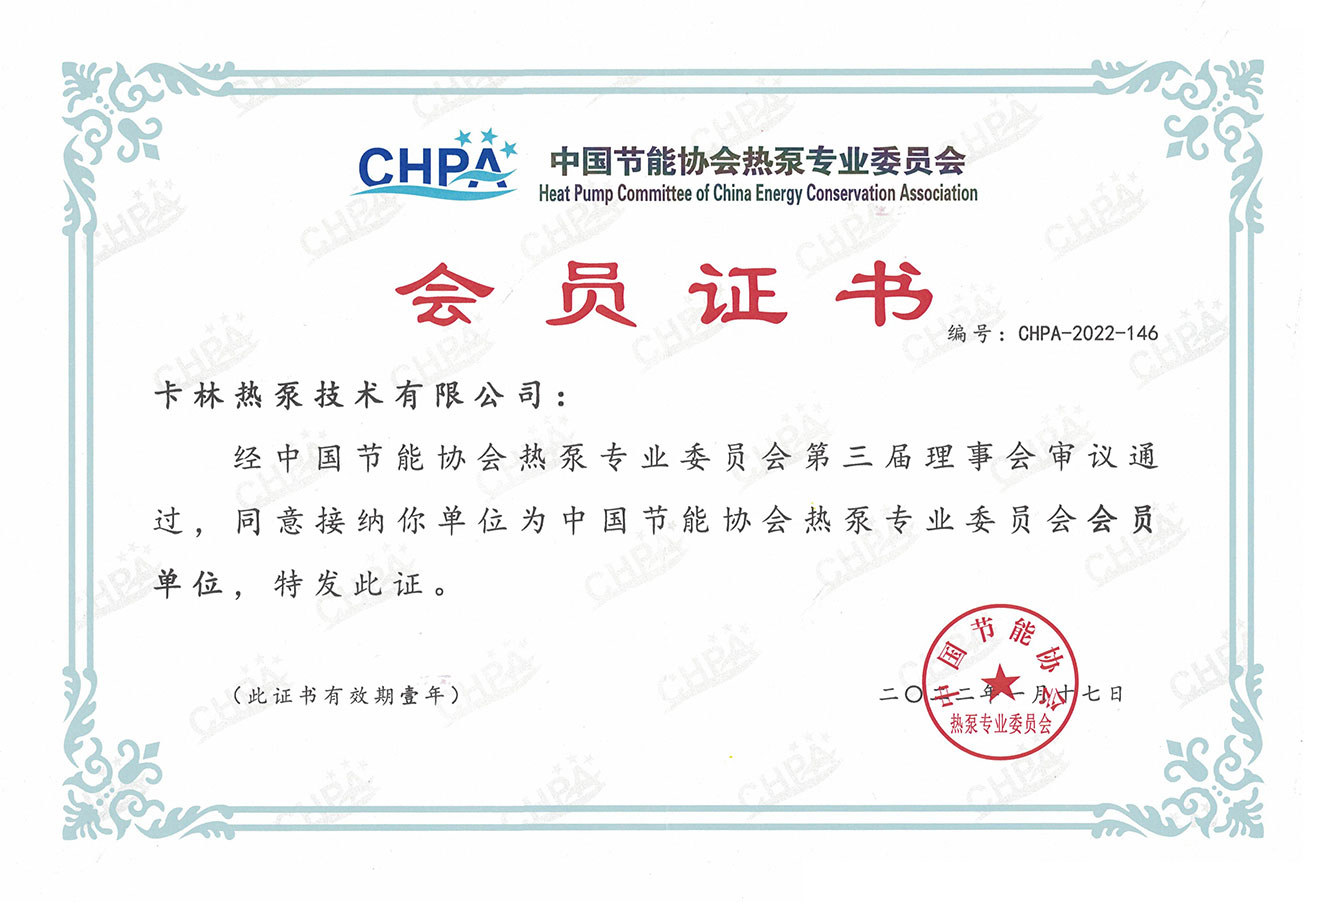 Member of China Energy Conservation Association